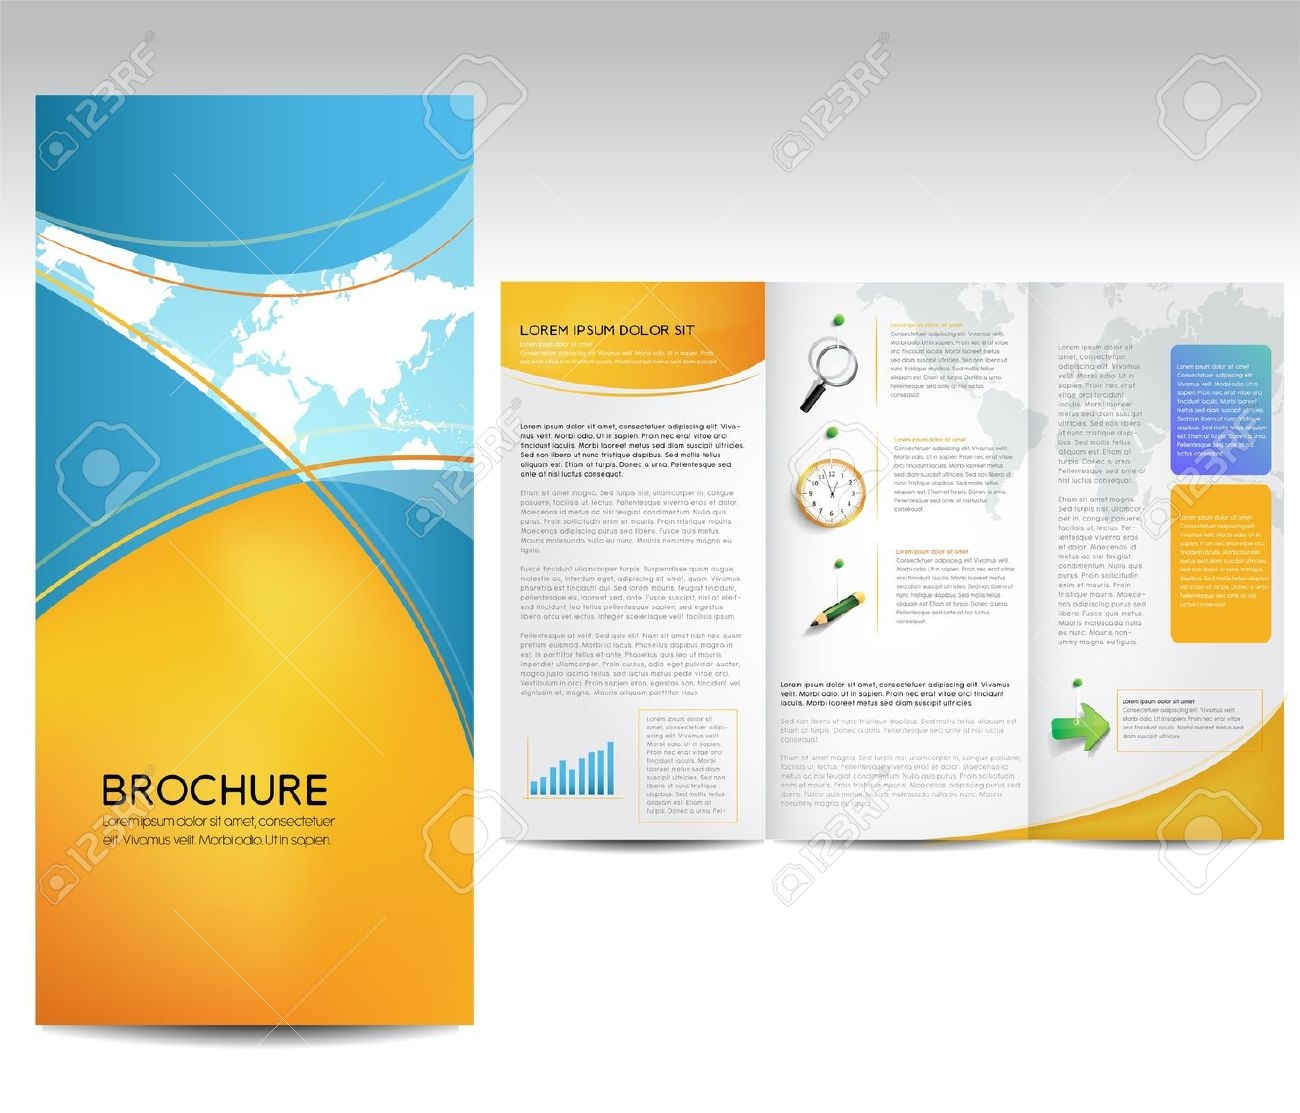 Free Brochure Templates For Word 2010 - Atlantaauctionco Intended For Free Brochure Templates For Word 2010